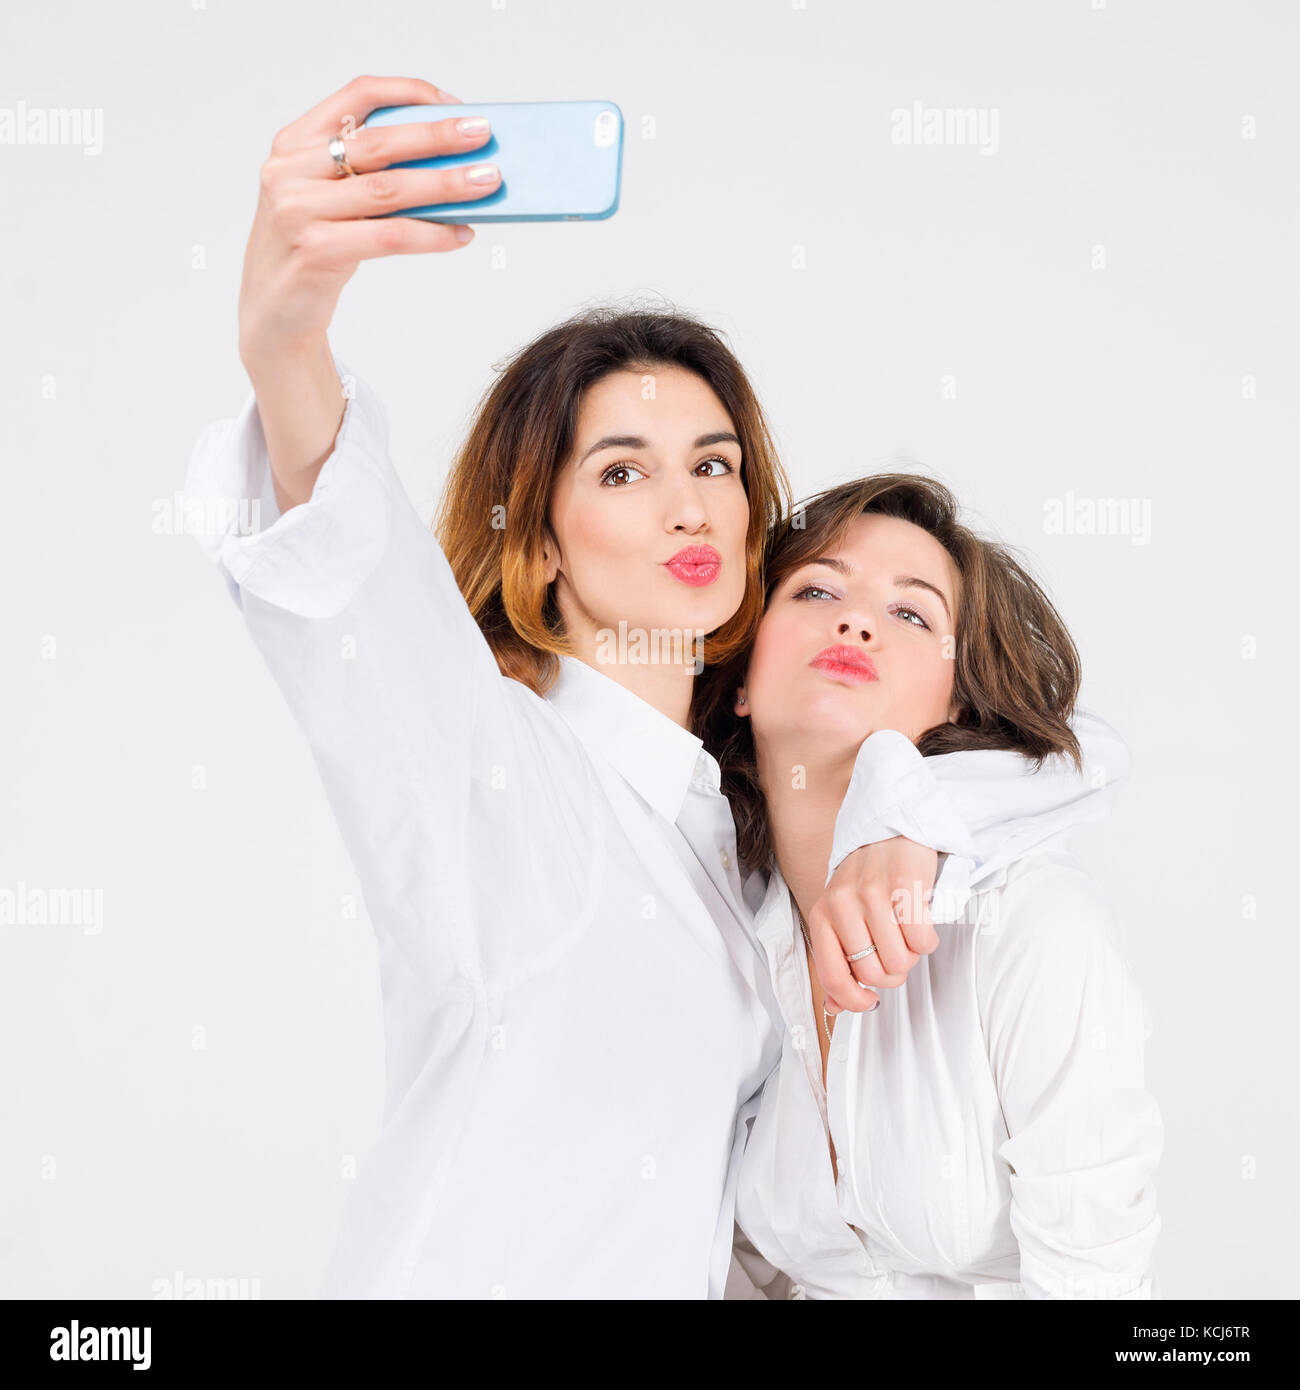 20 Awesome Selfie Poses & Ideas to Rock Your Social Media